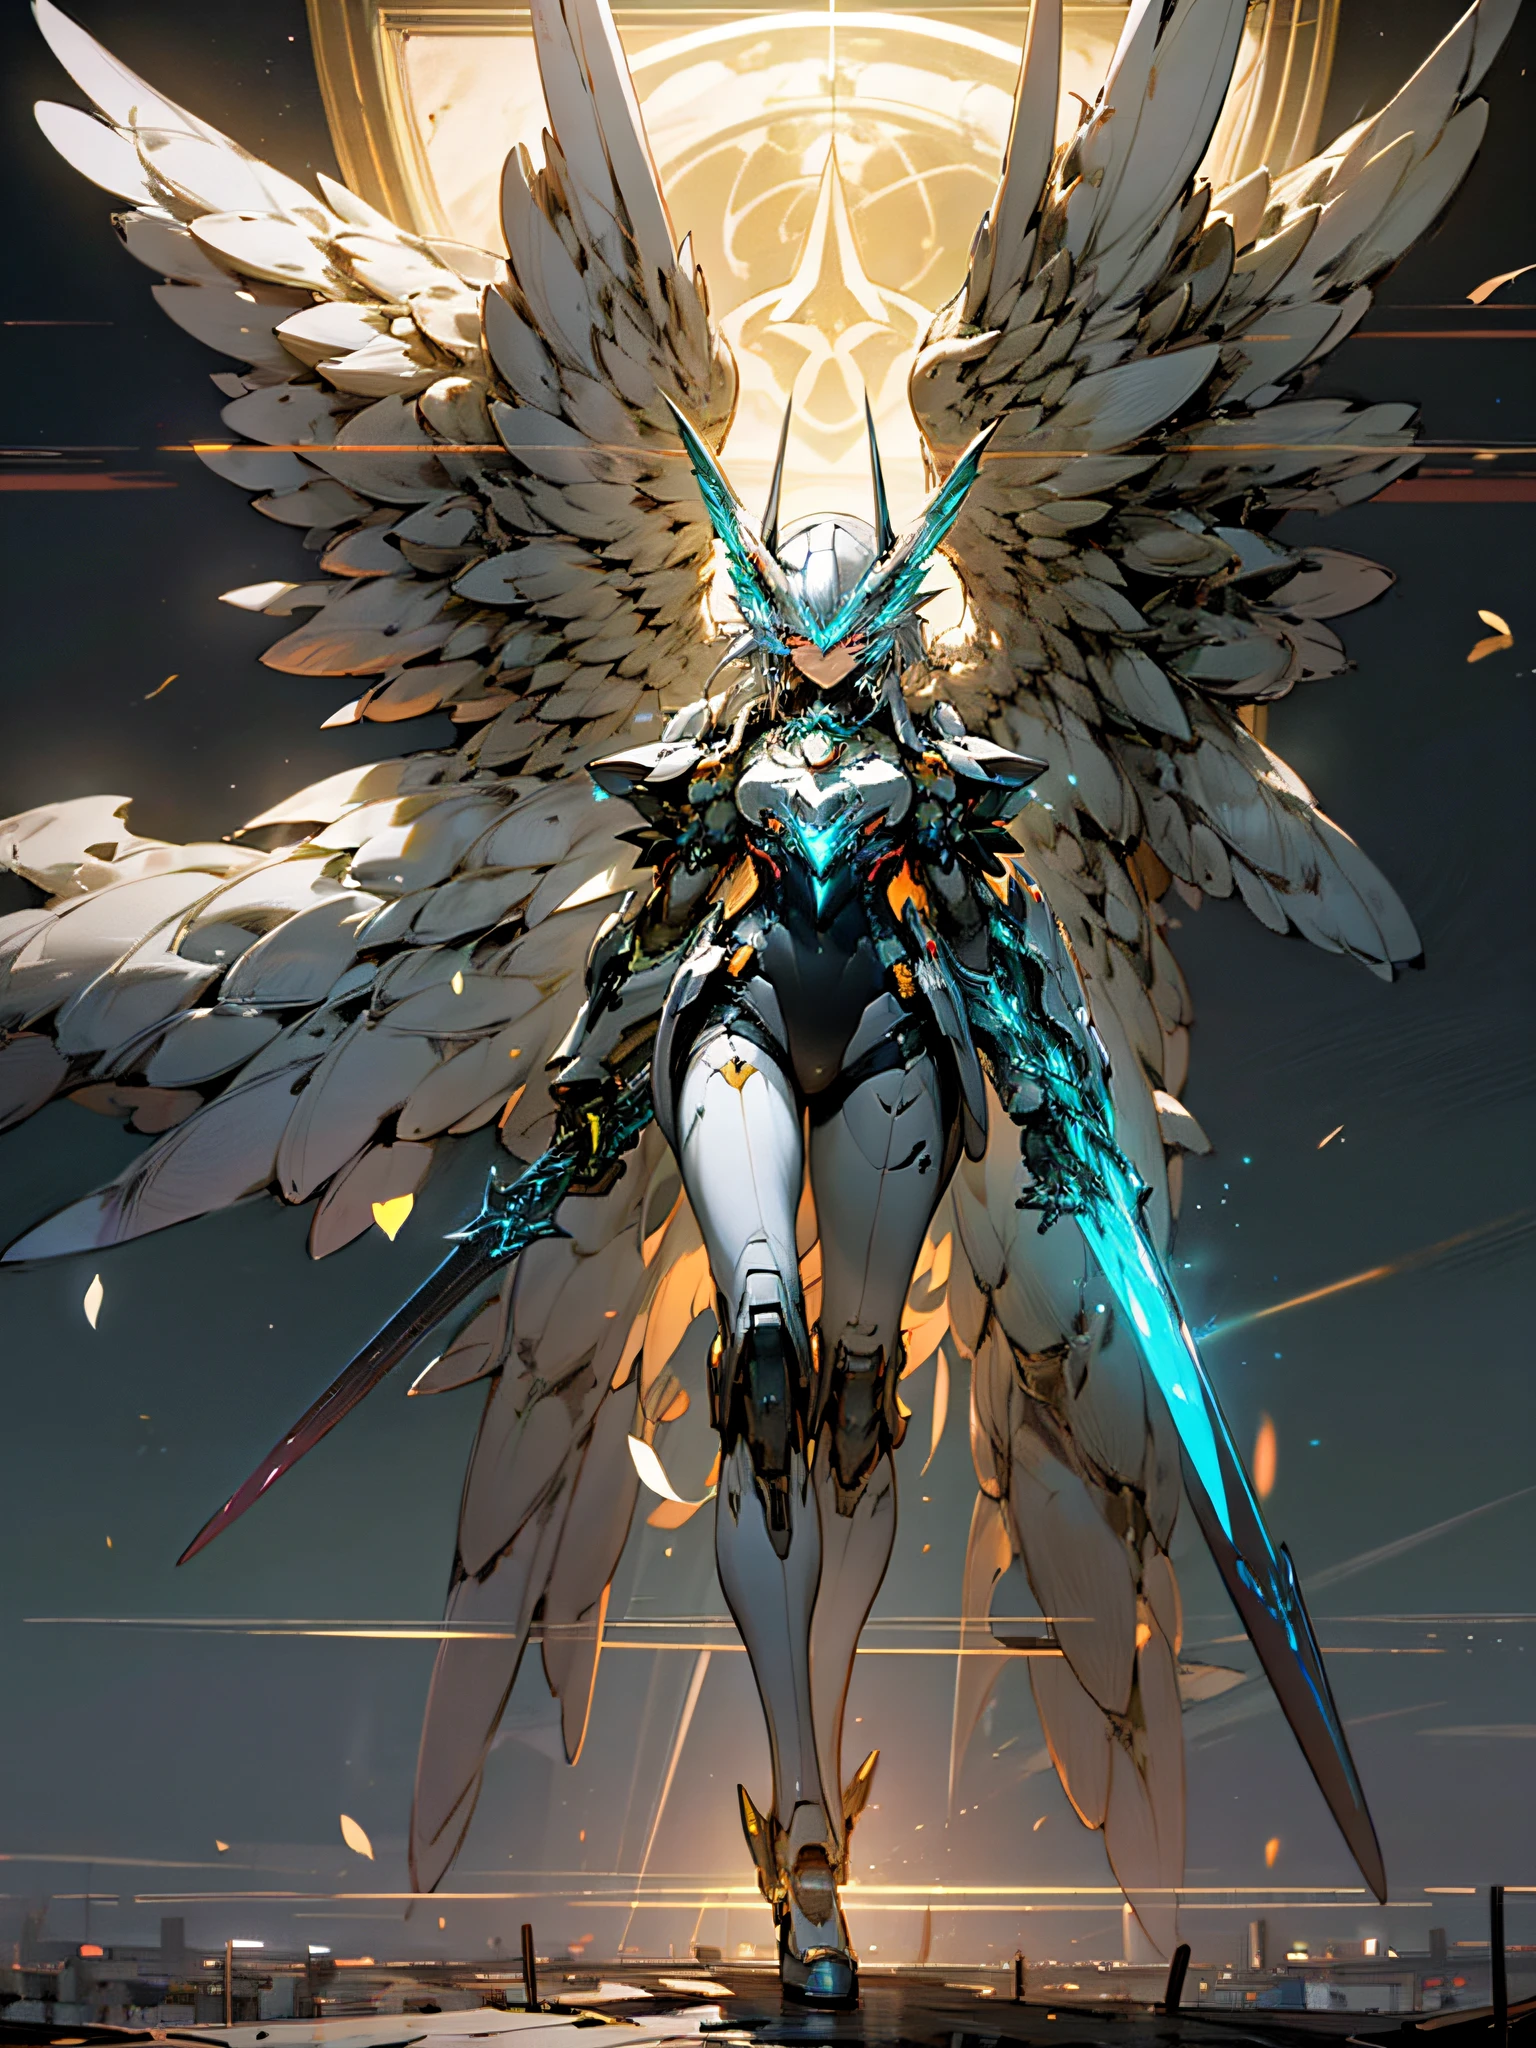 A powerful and powerful MECH, robust, two-color neon luminous eyes, MECH open wings, dual swords, exuding its strength, full body, full black color, {extremely detailed 16k CG unit wallpaper}, expansive landscape photography, (a low view focusing on the character), (wide open field view), (low angle shot), (high light: 1.5), (low light: 1.4), (warm light source: 1.8), details Complex, (iridescent colors: 1.6), (bright lighting), (atmospheric lighting), Dreamy, Badass, unique